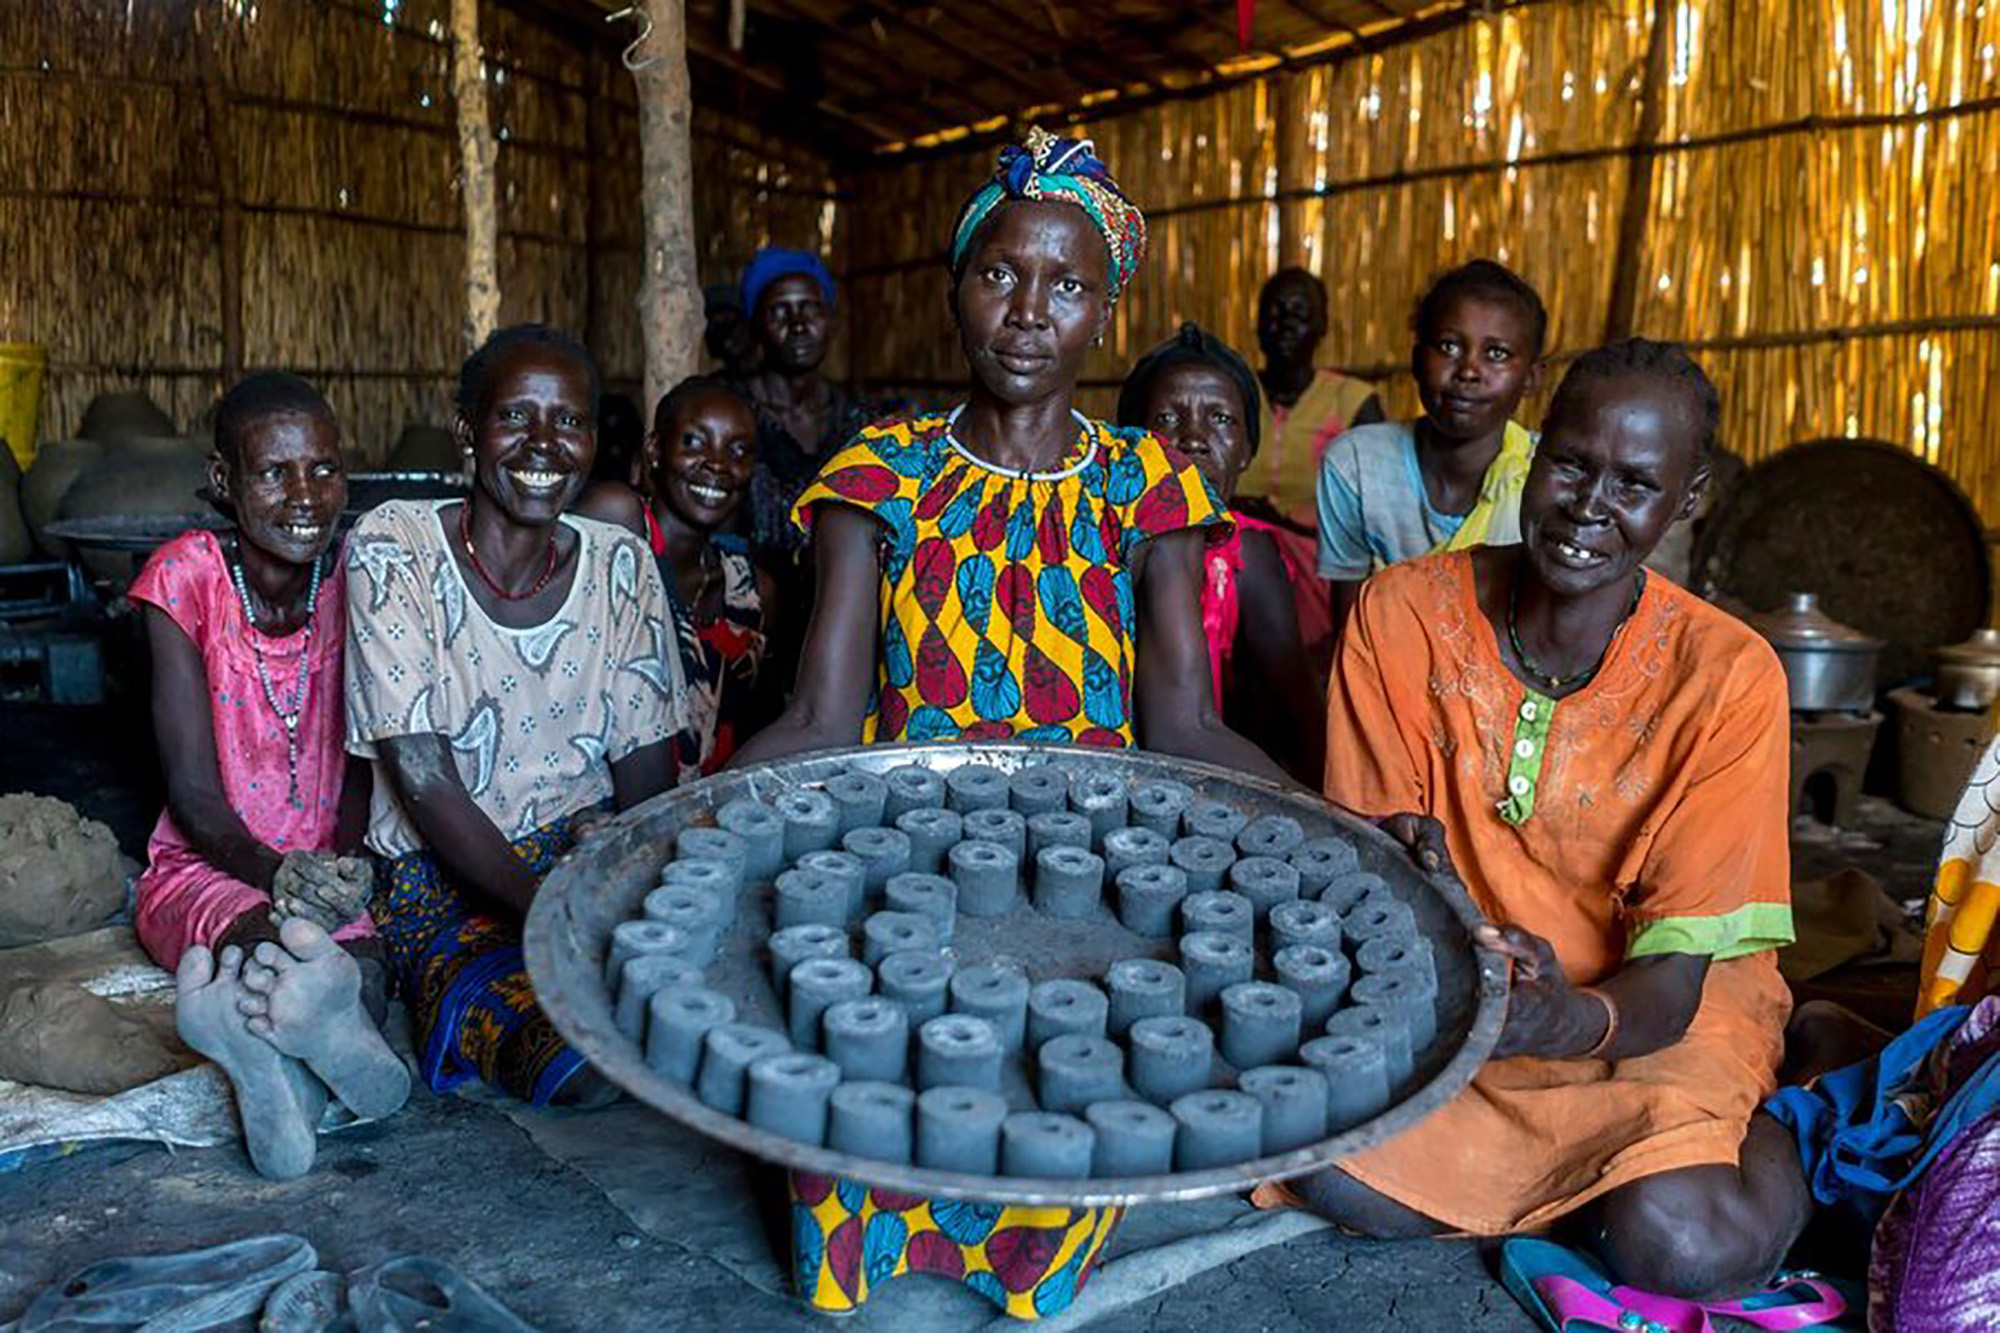 A woman showing a plate of charcoal briquettes made from charred water hyacinths, an invasive species that disrupts waterways and aquatic food systems.